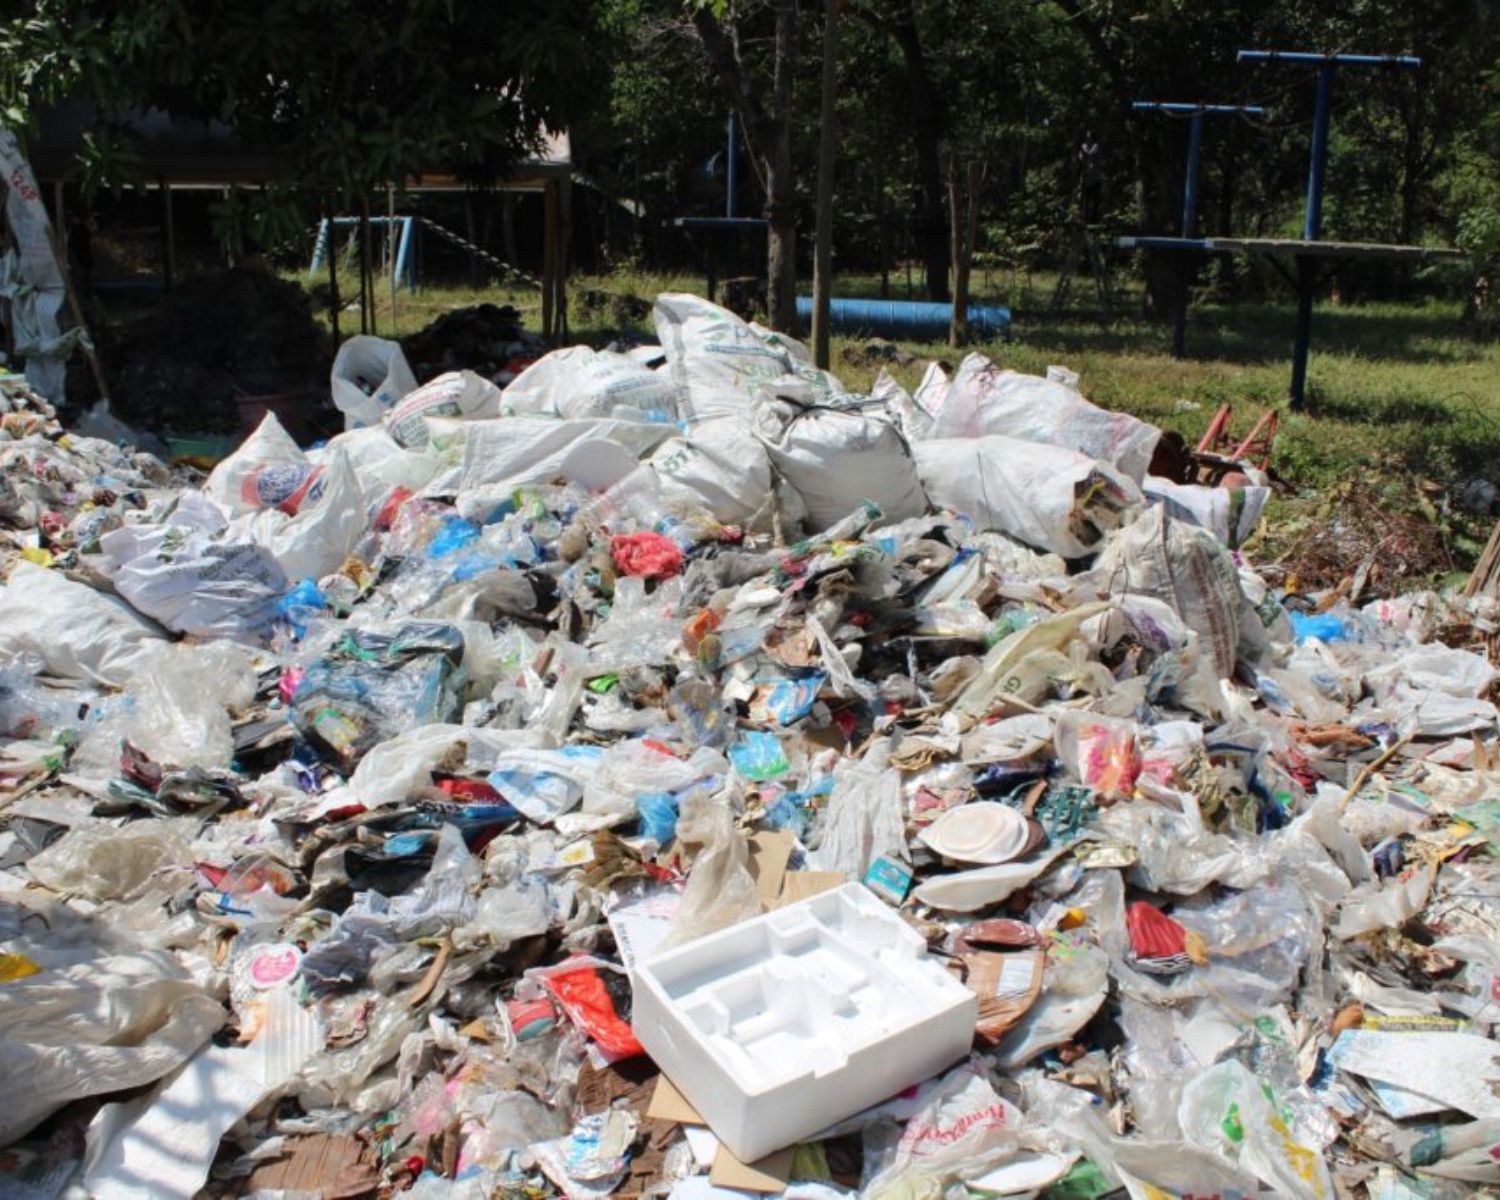 Plastics and other waste items collected at the Surabaya harbour amidst paper imports.